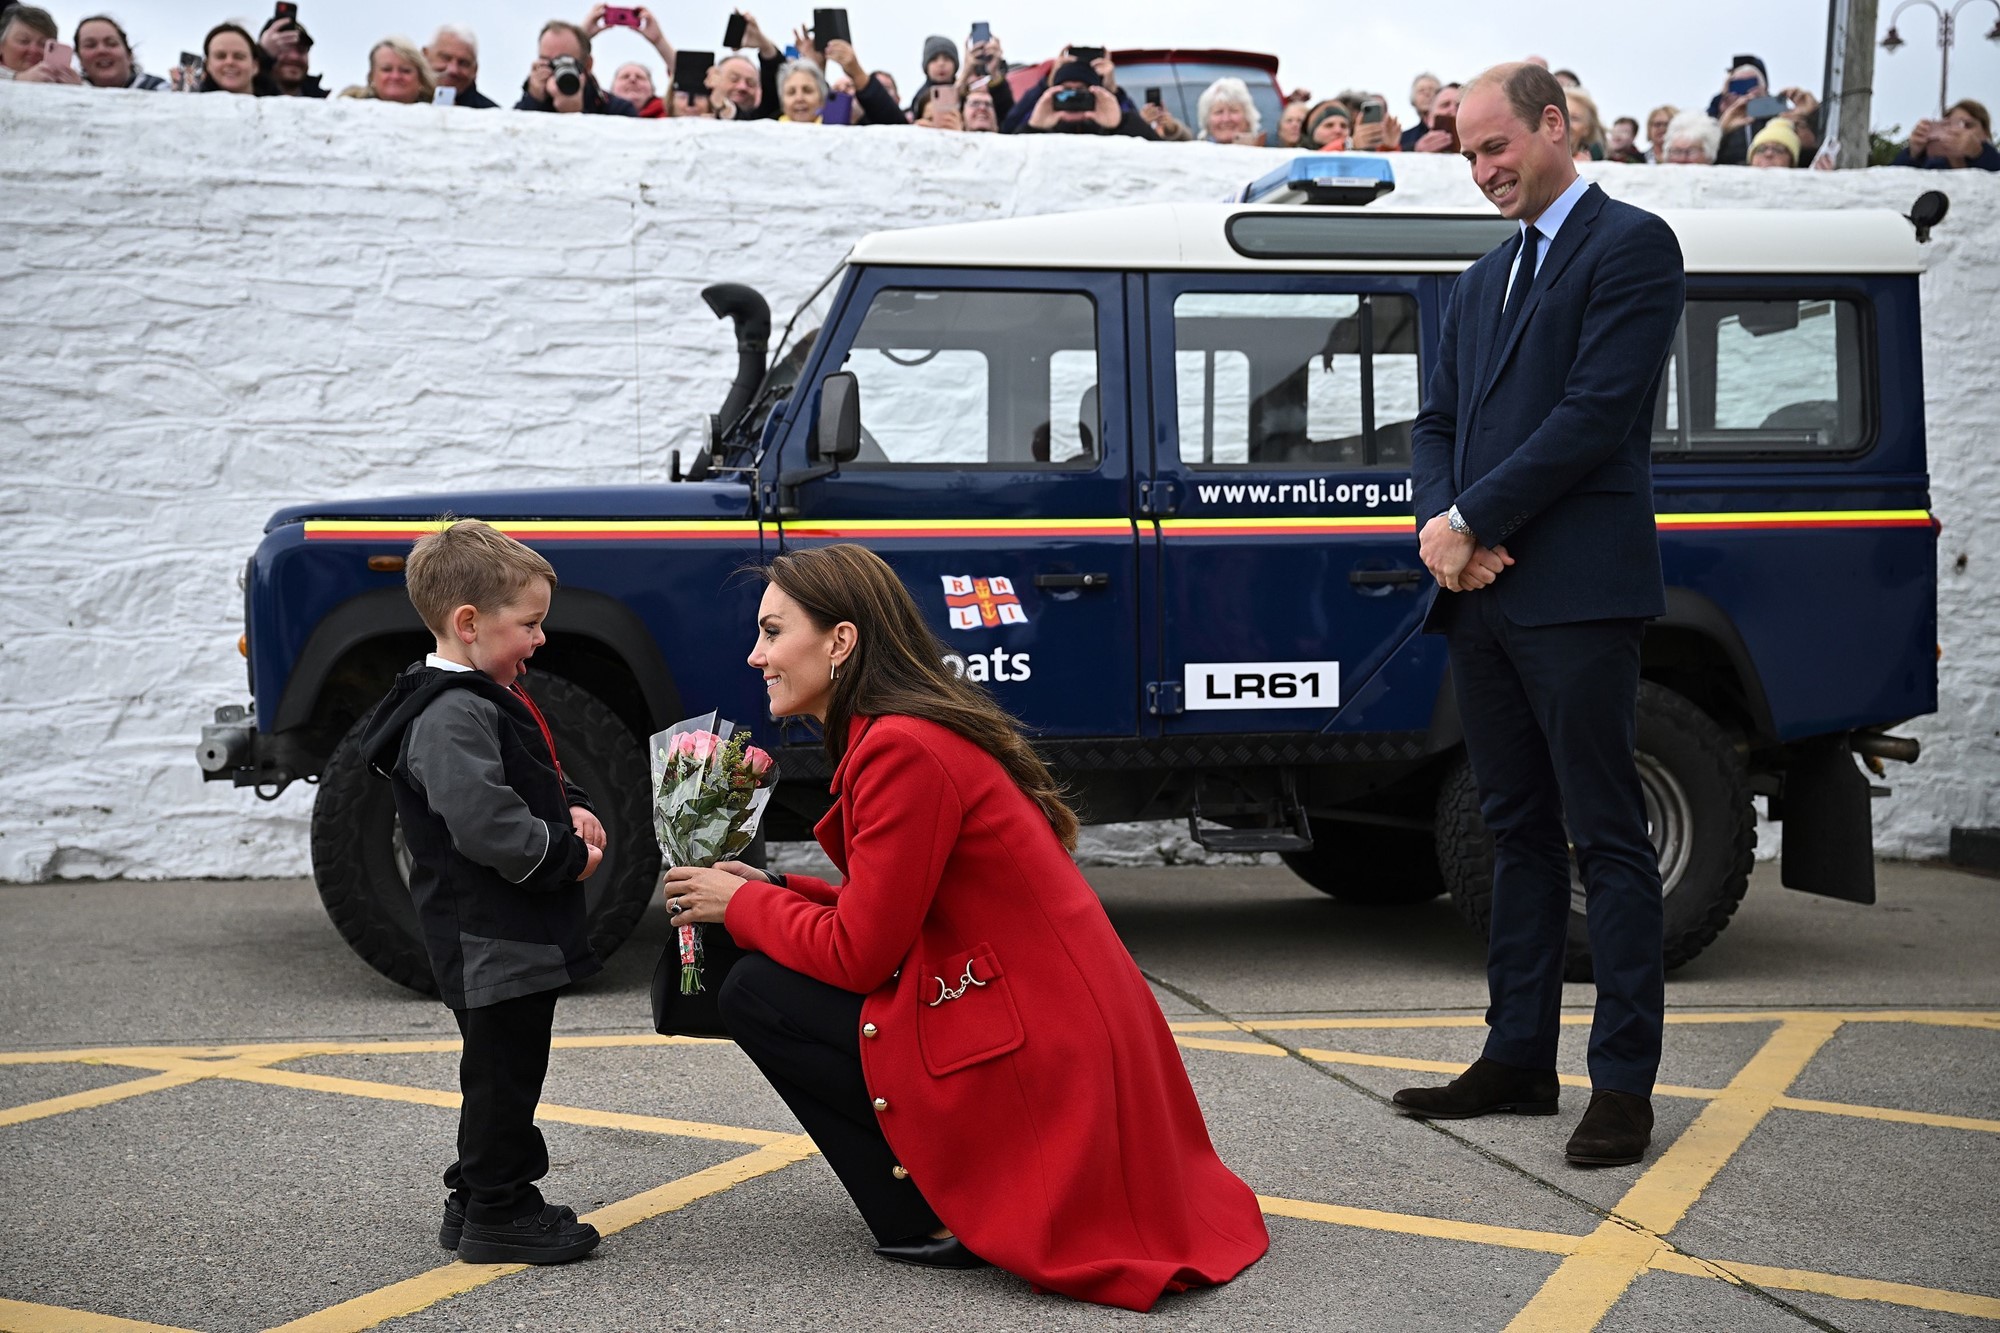 Princess Catherine crouches to greet a young boy. Prince William stands behind Catherine